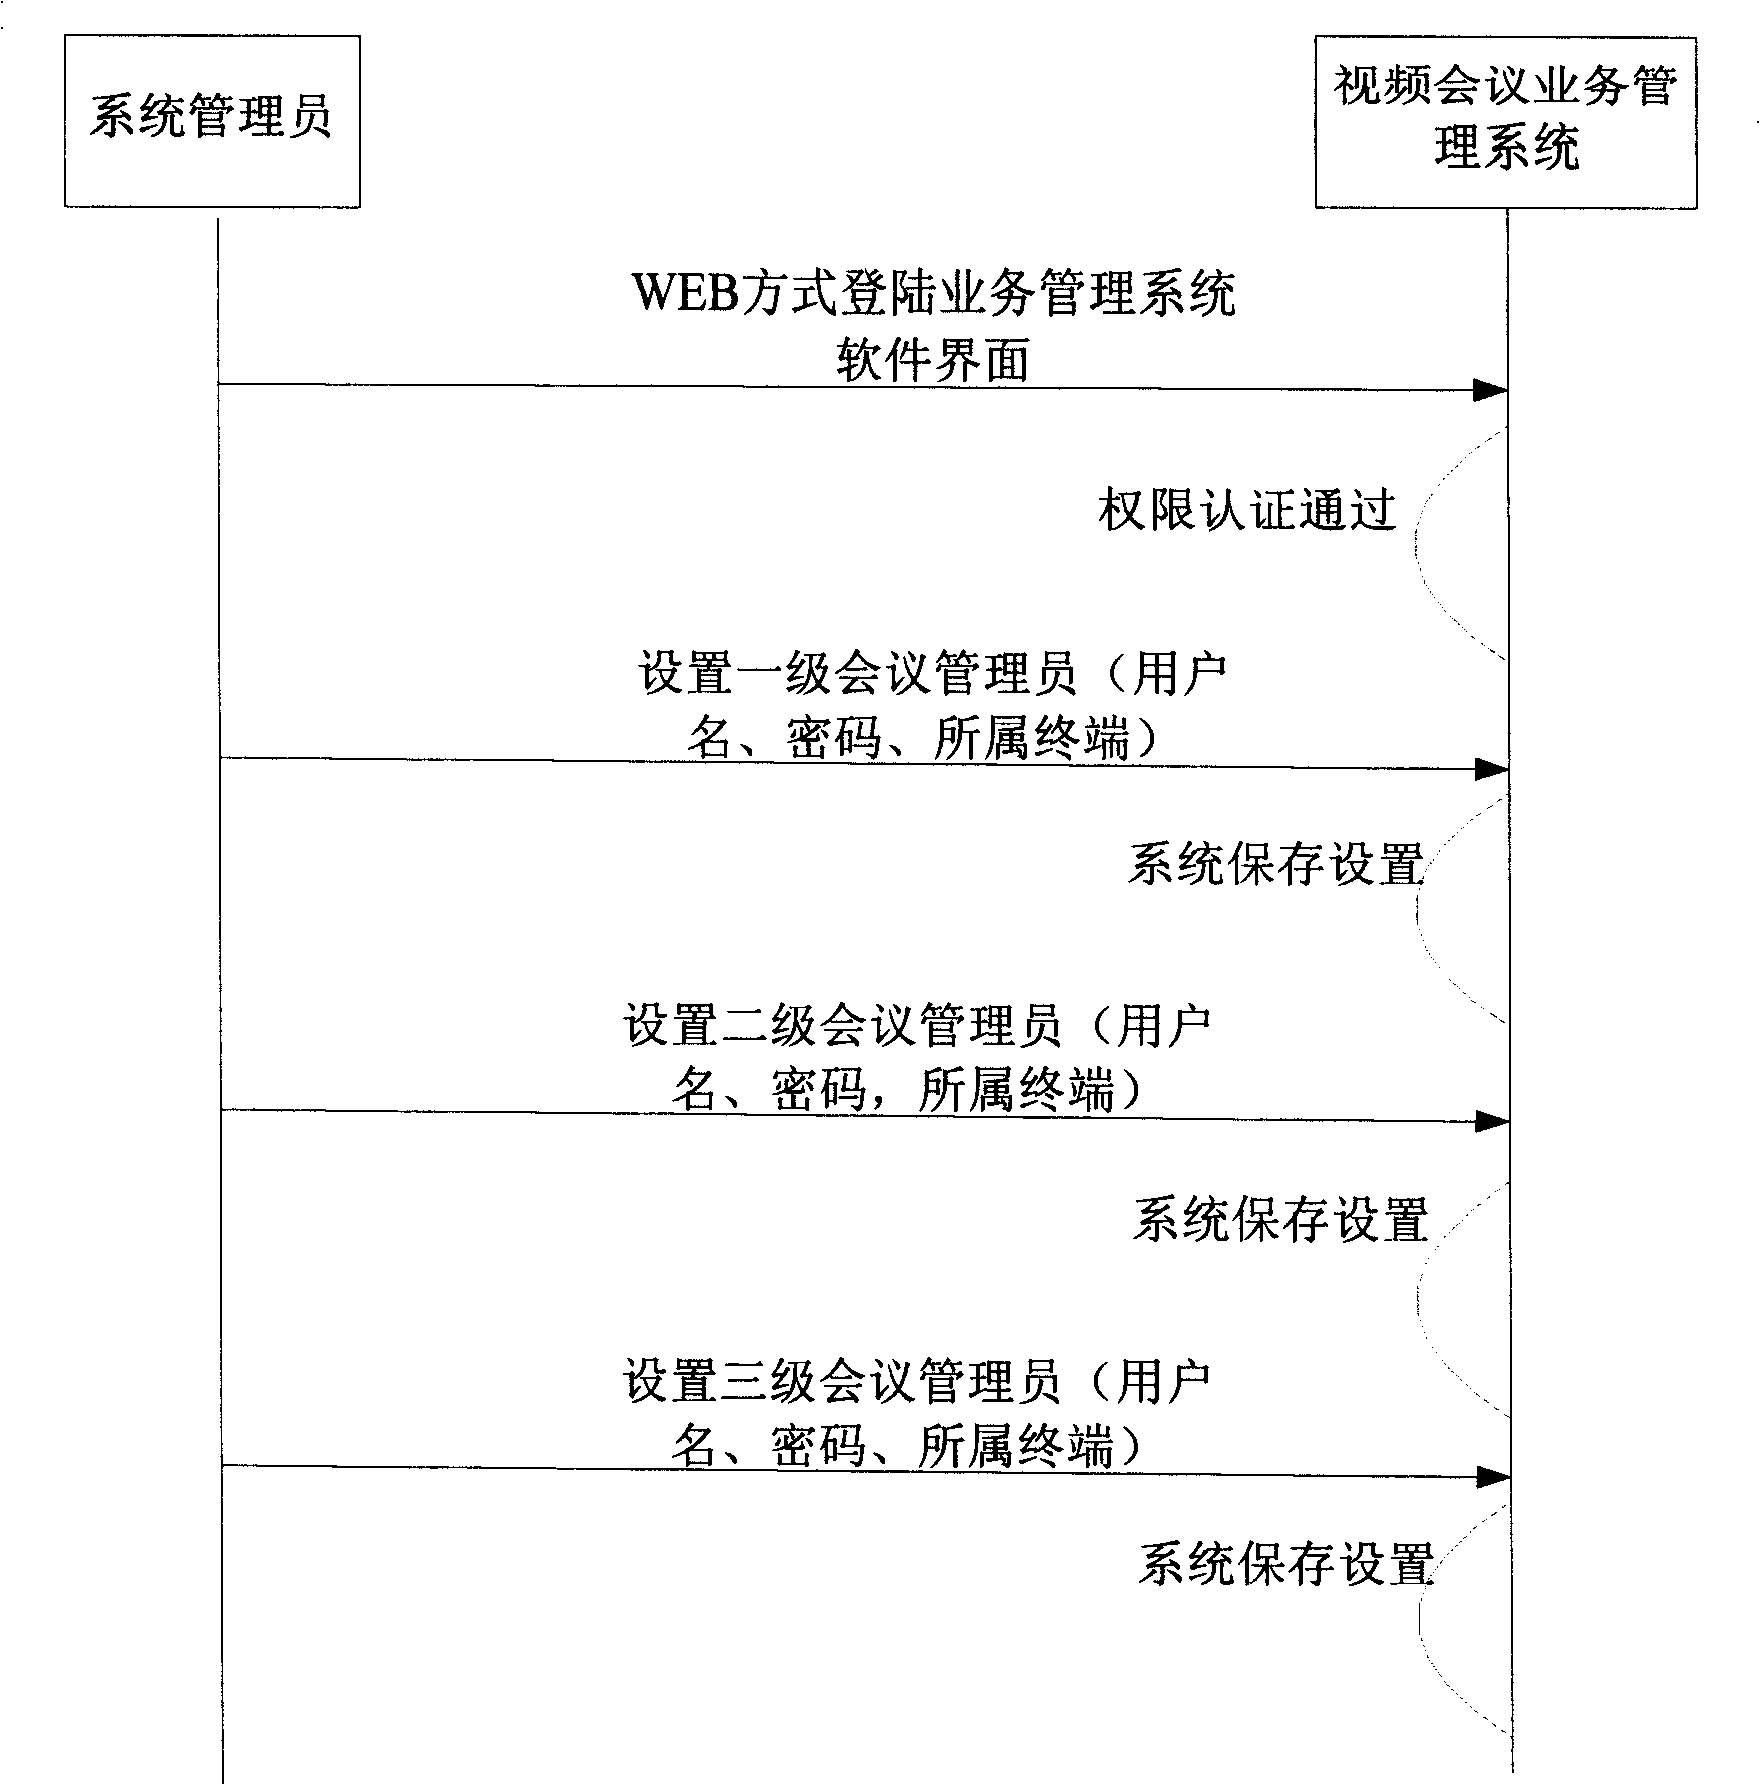 System and method for managing and controlling video conference